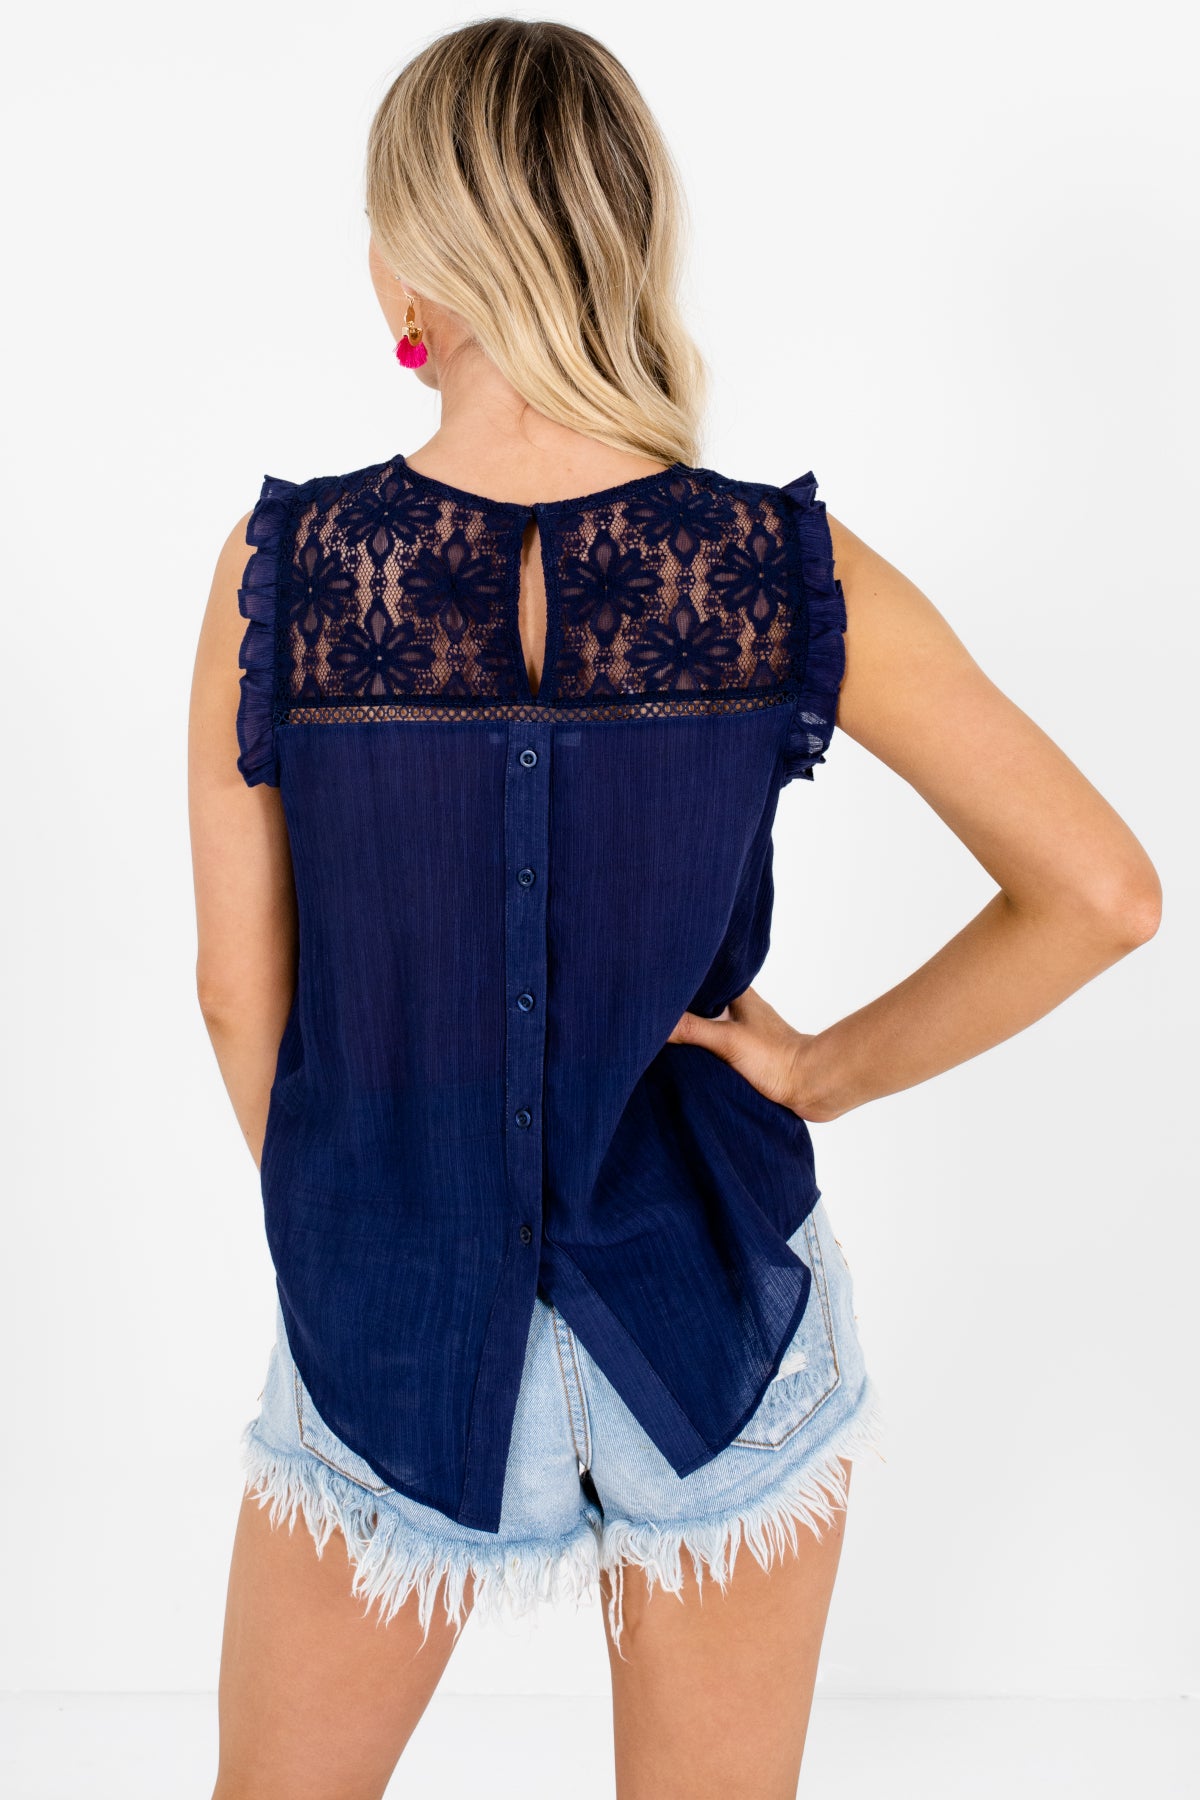 Navy Blue Lace Ruffle Tops Affordable Online Boutique